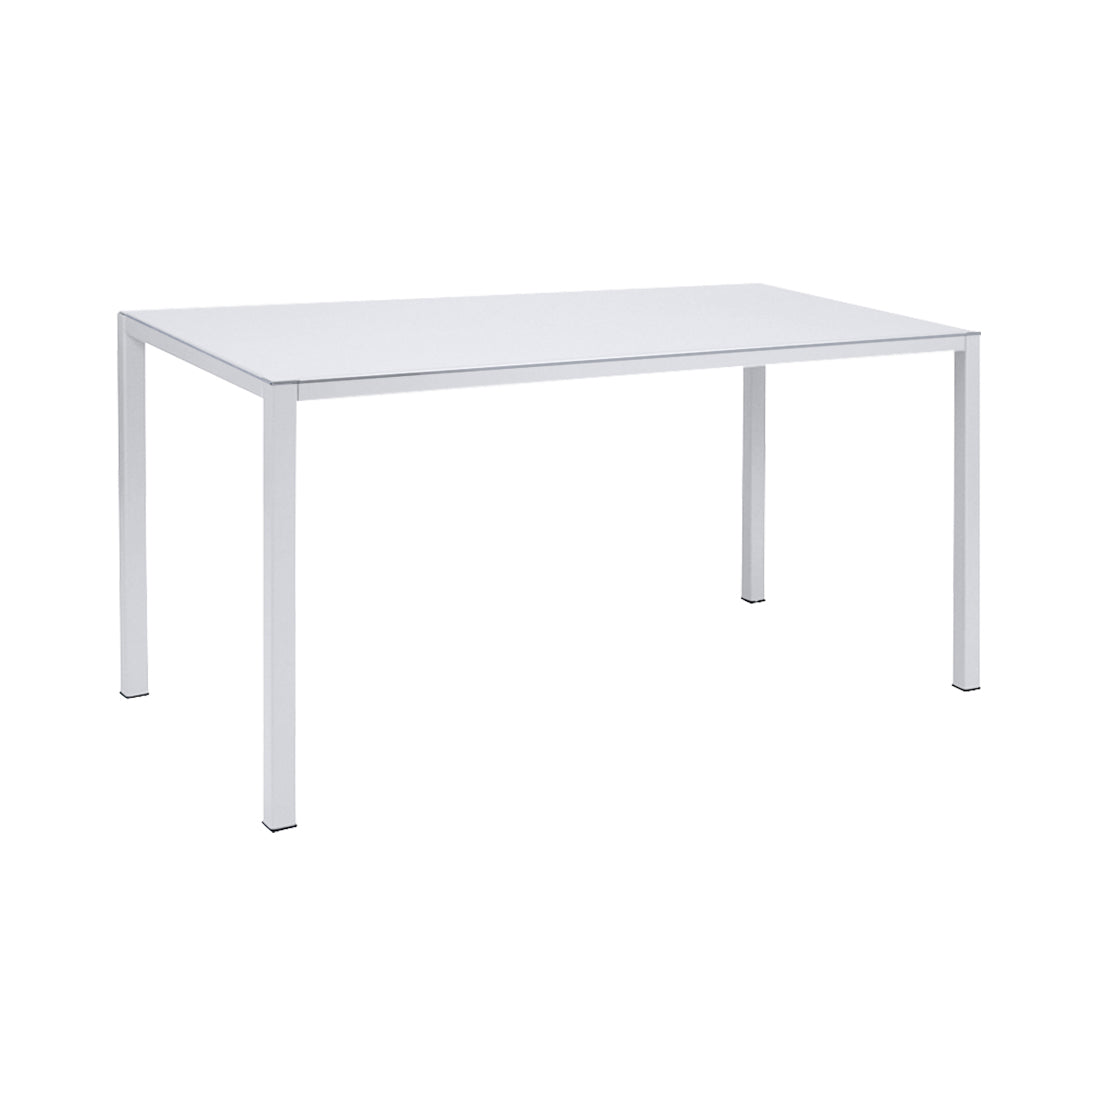 The Edge Dining Table